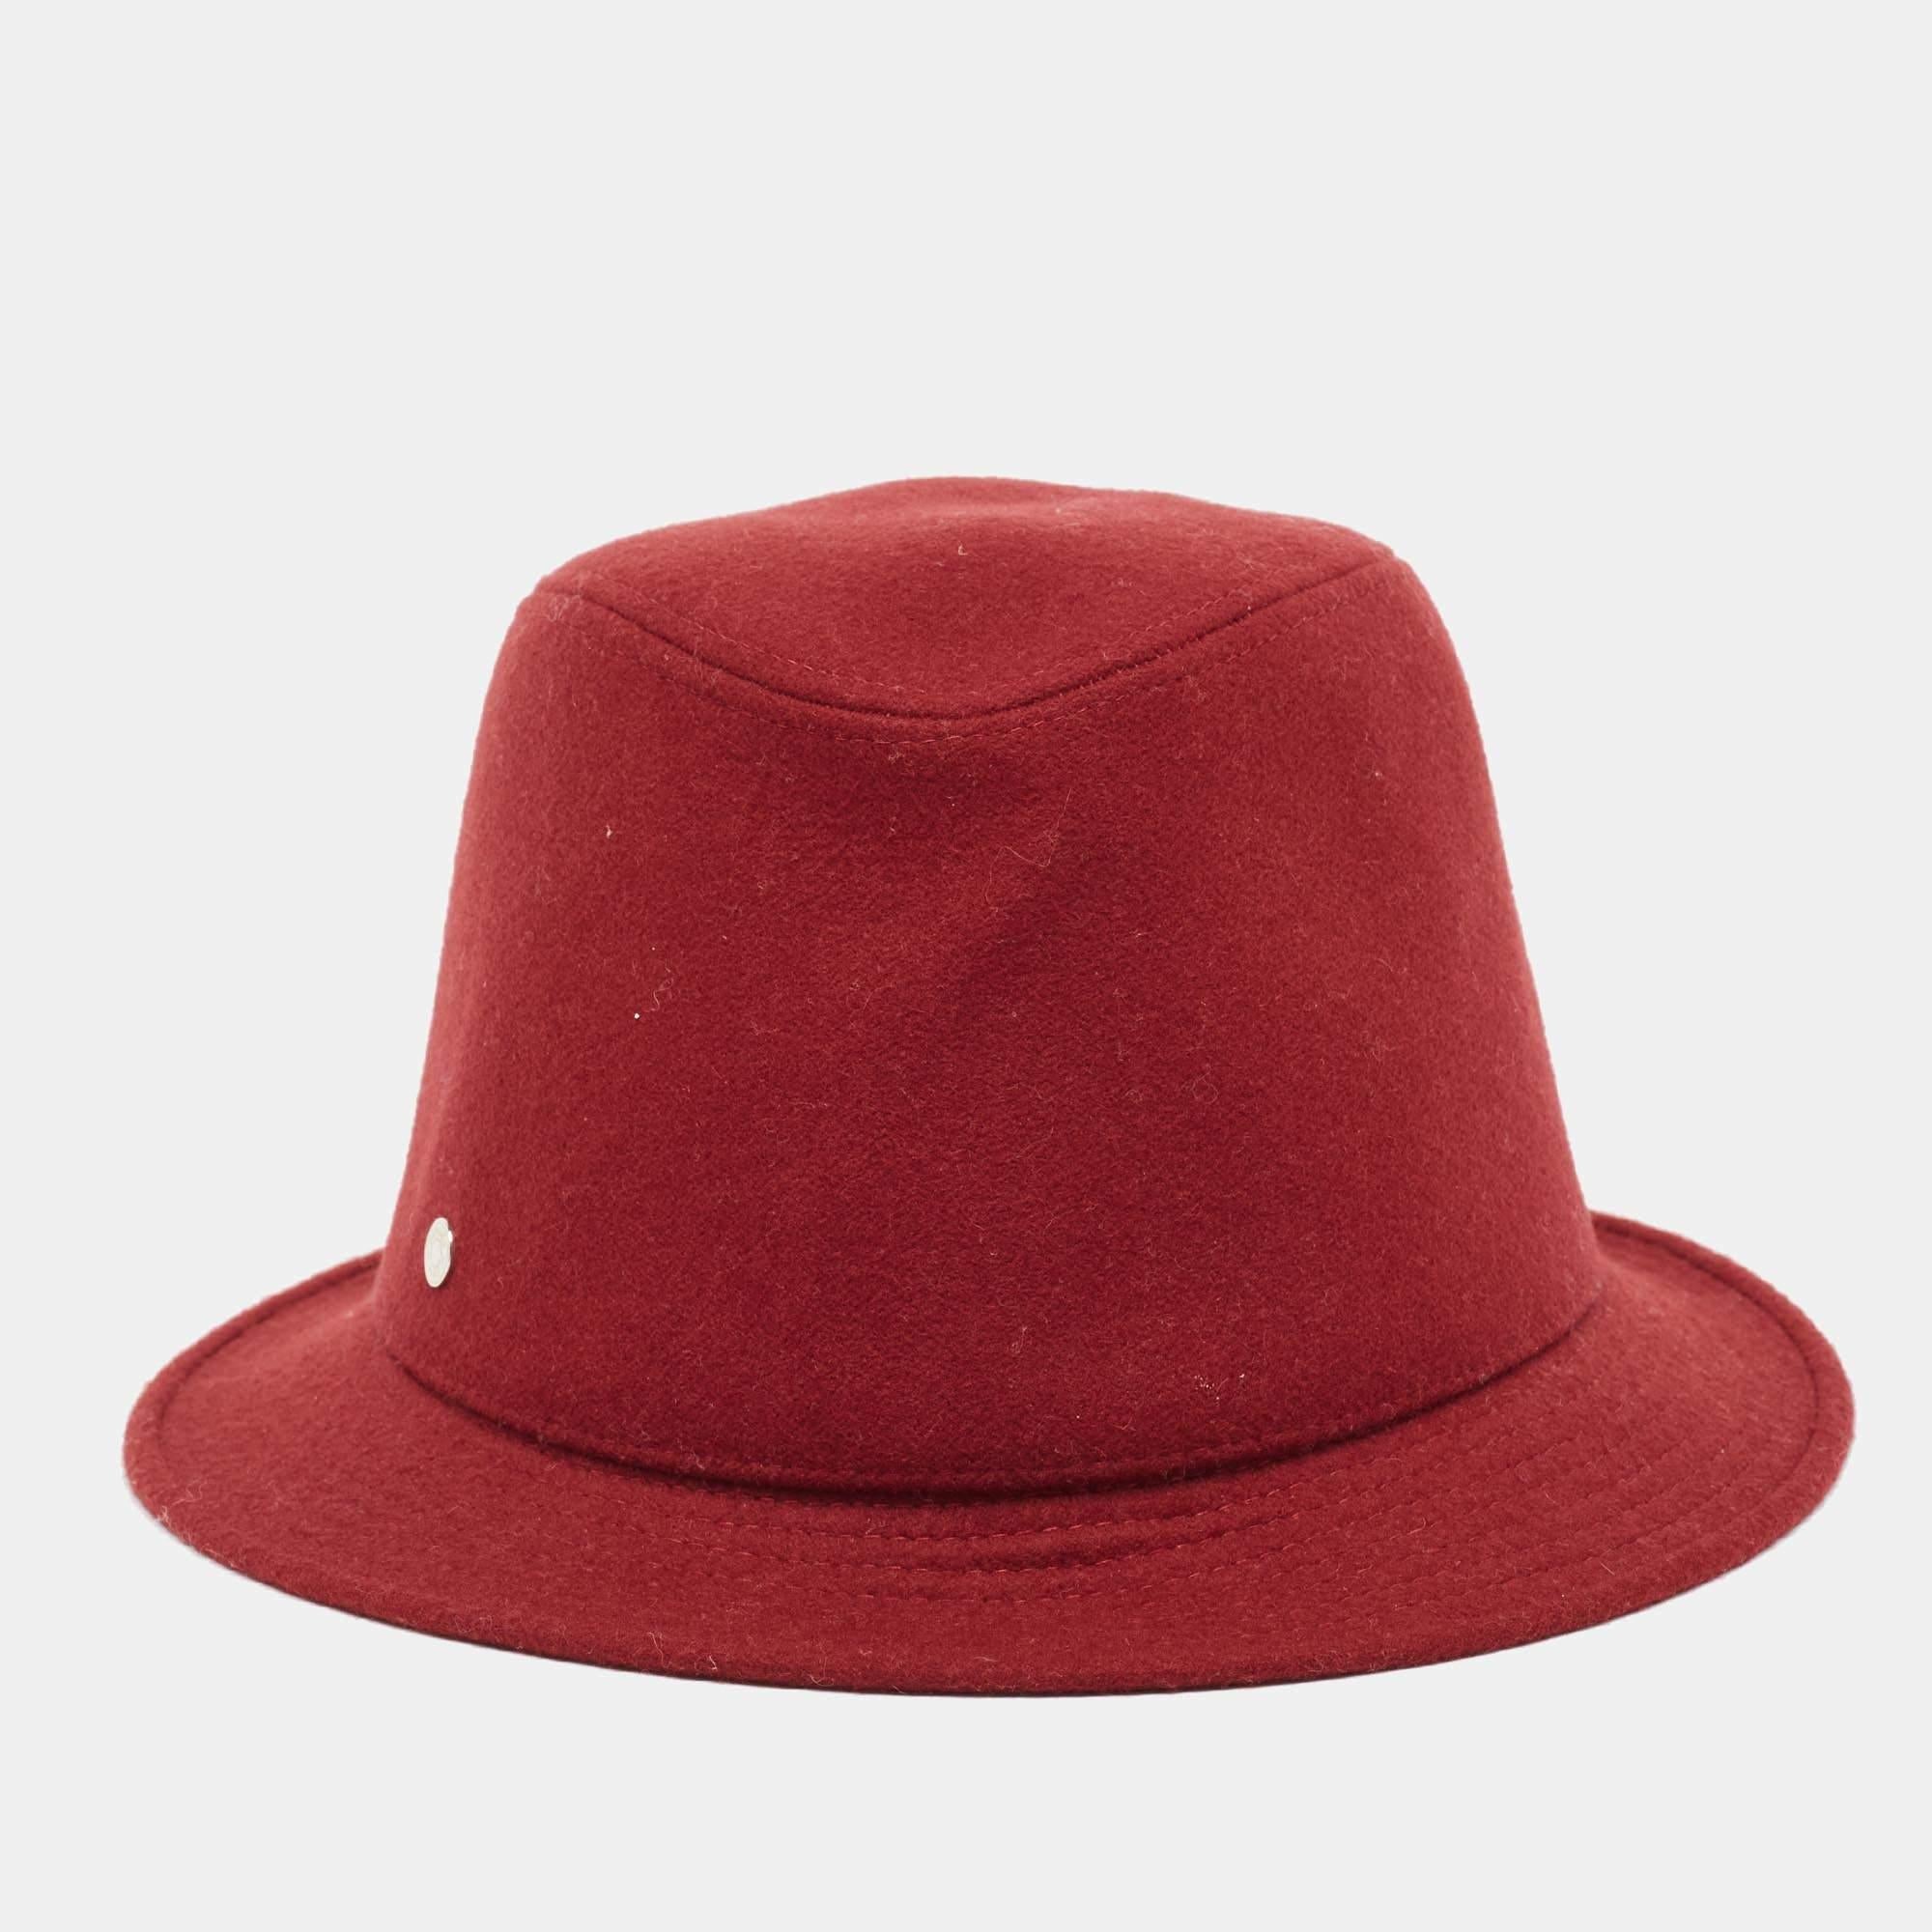 The use of cashmere, the red hue, and the metal brand accent come together to create this Hermes hat. A hat like this one is a style essential that will elevate your accessory game again and again.

